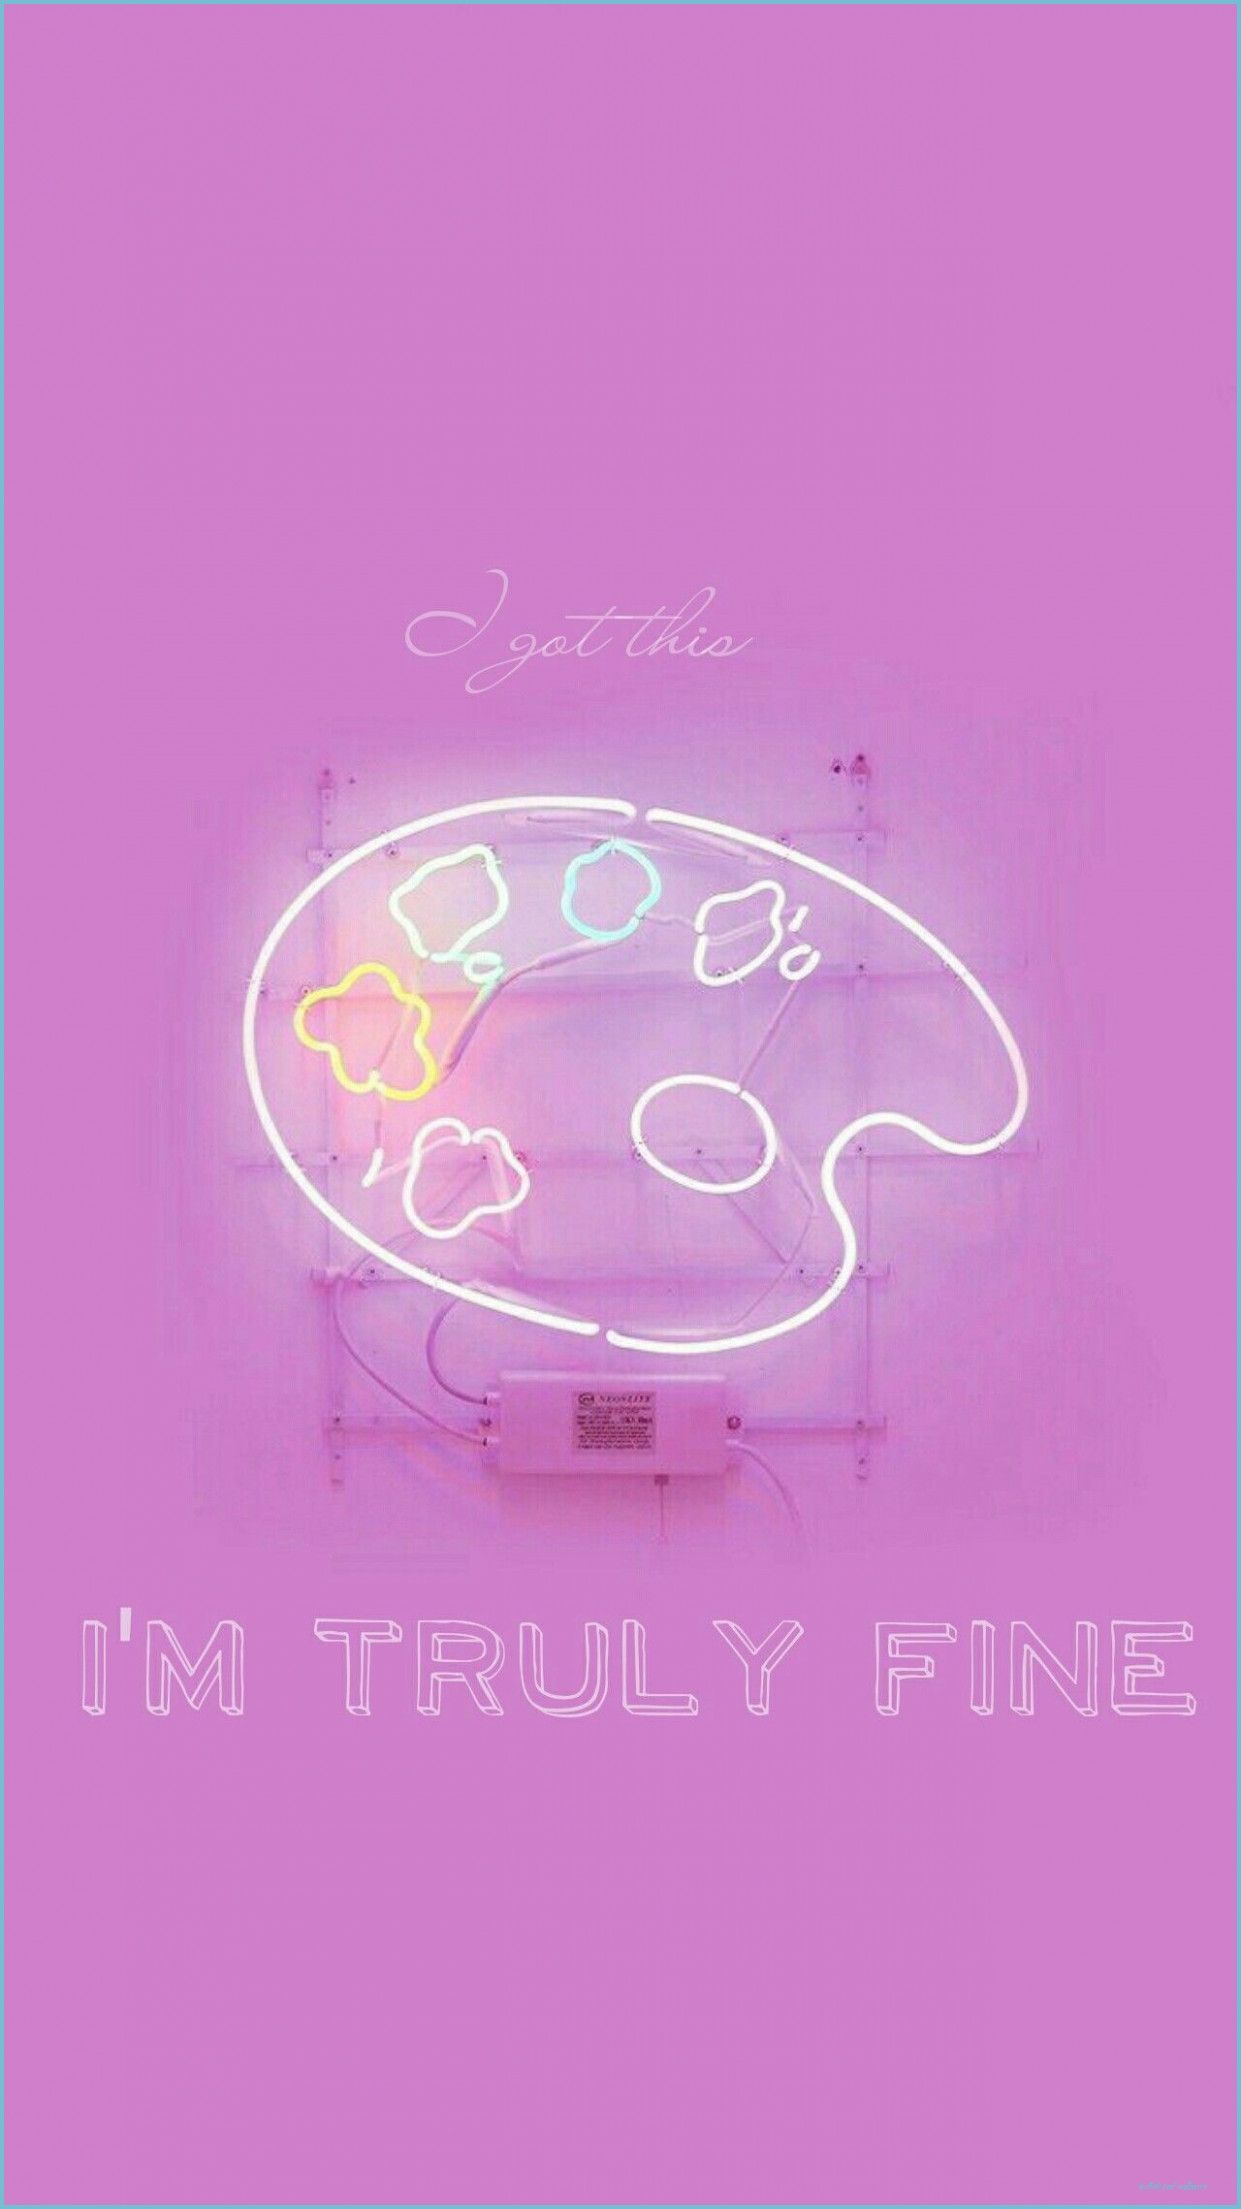 A neon sign that says i'm truly fine - Baddie